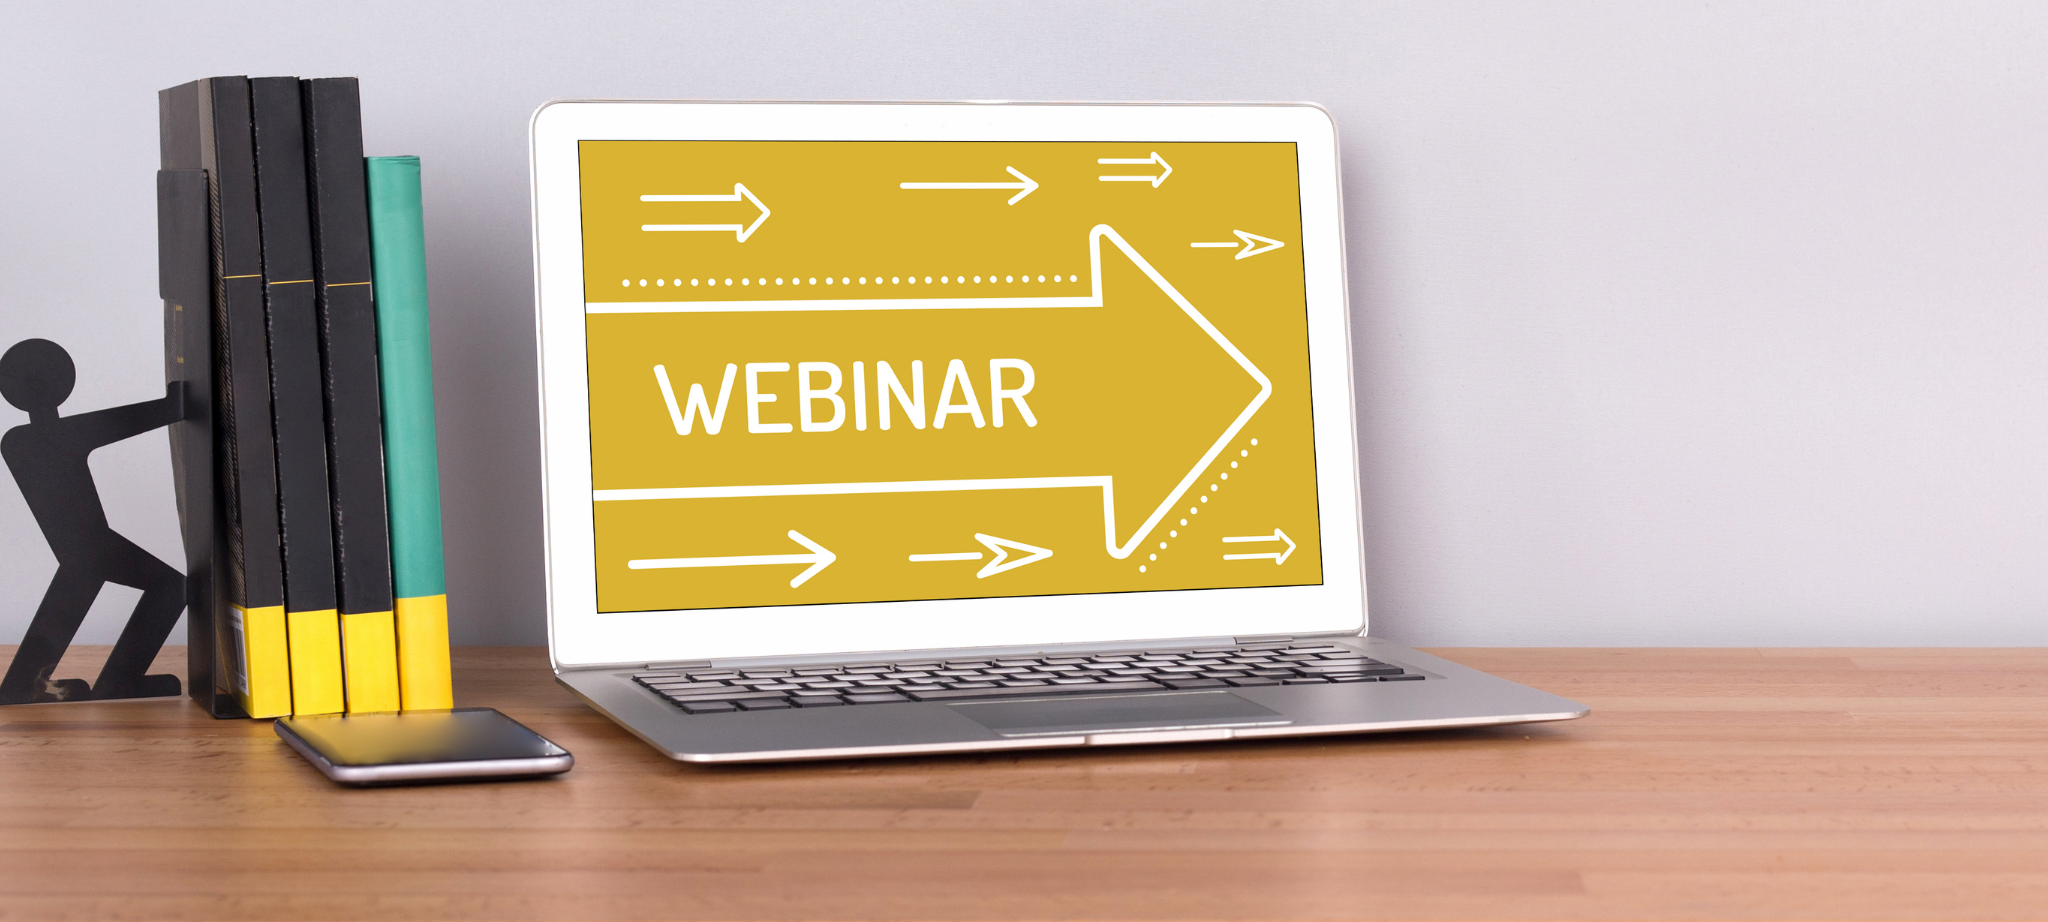 4 things to keep in mind when planning a webinar 